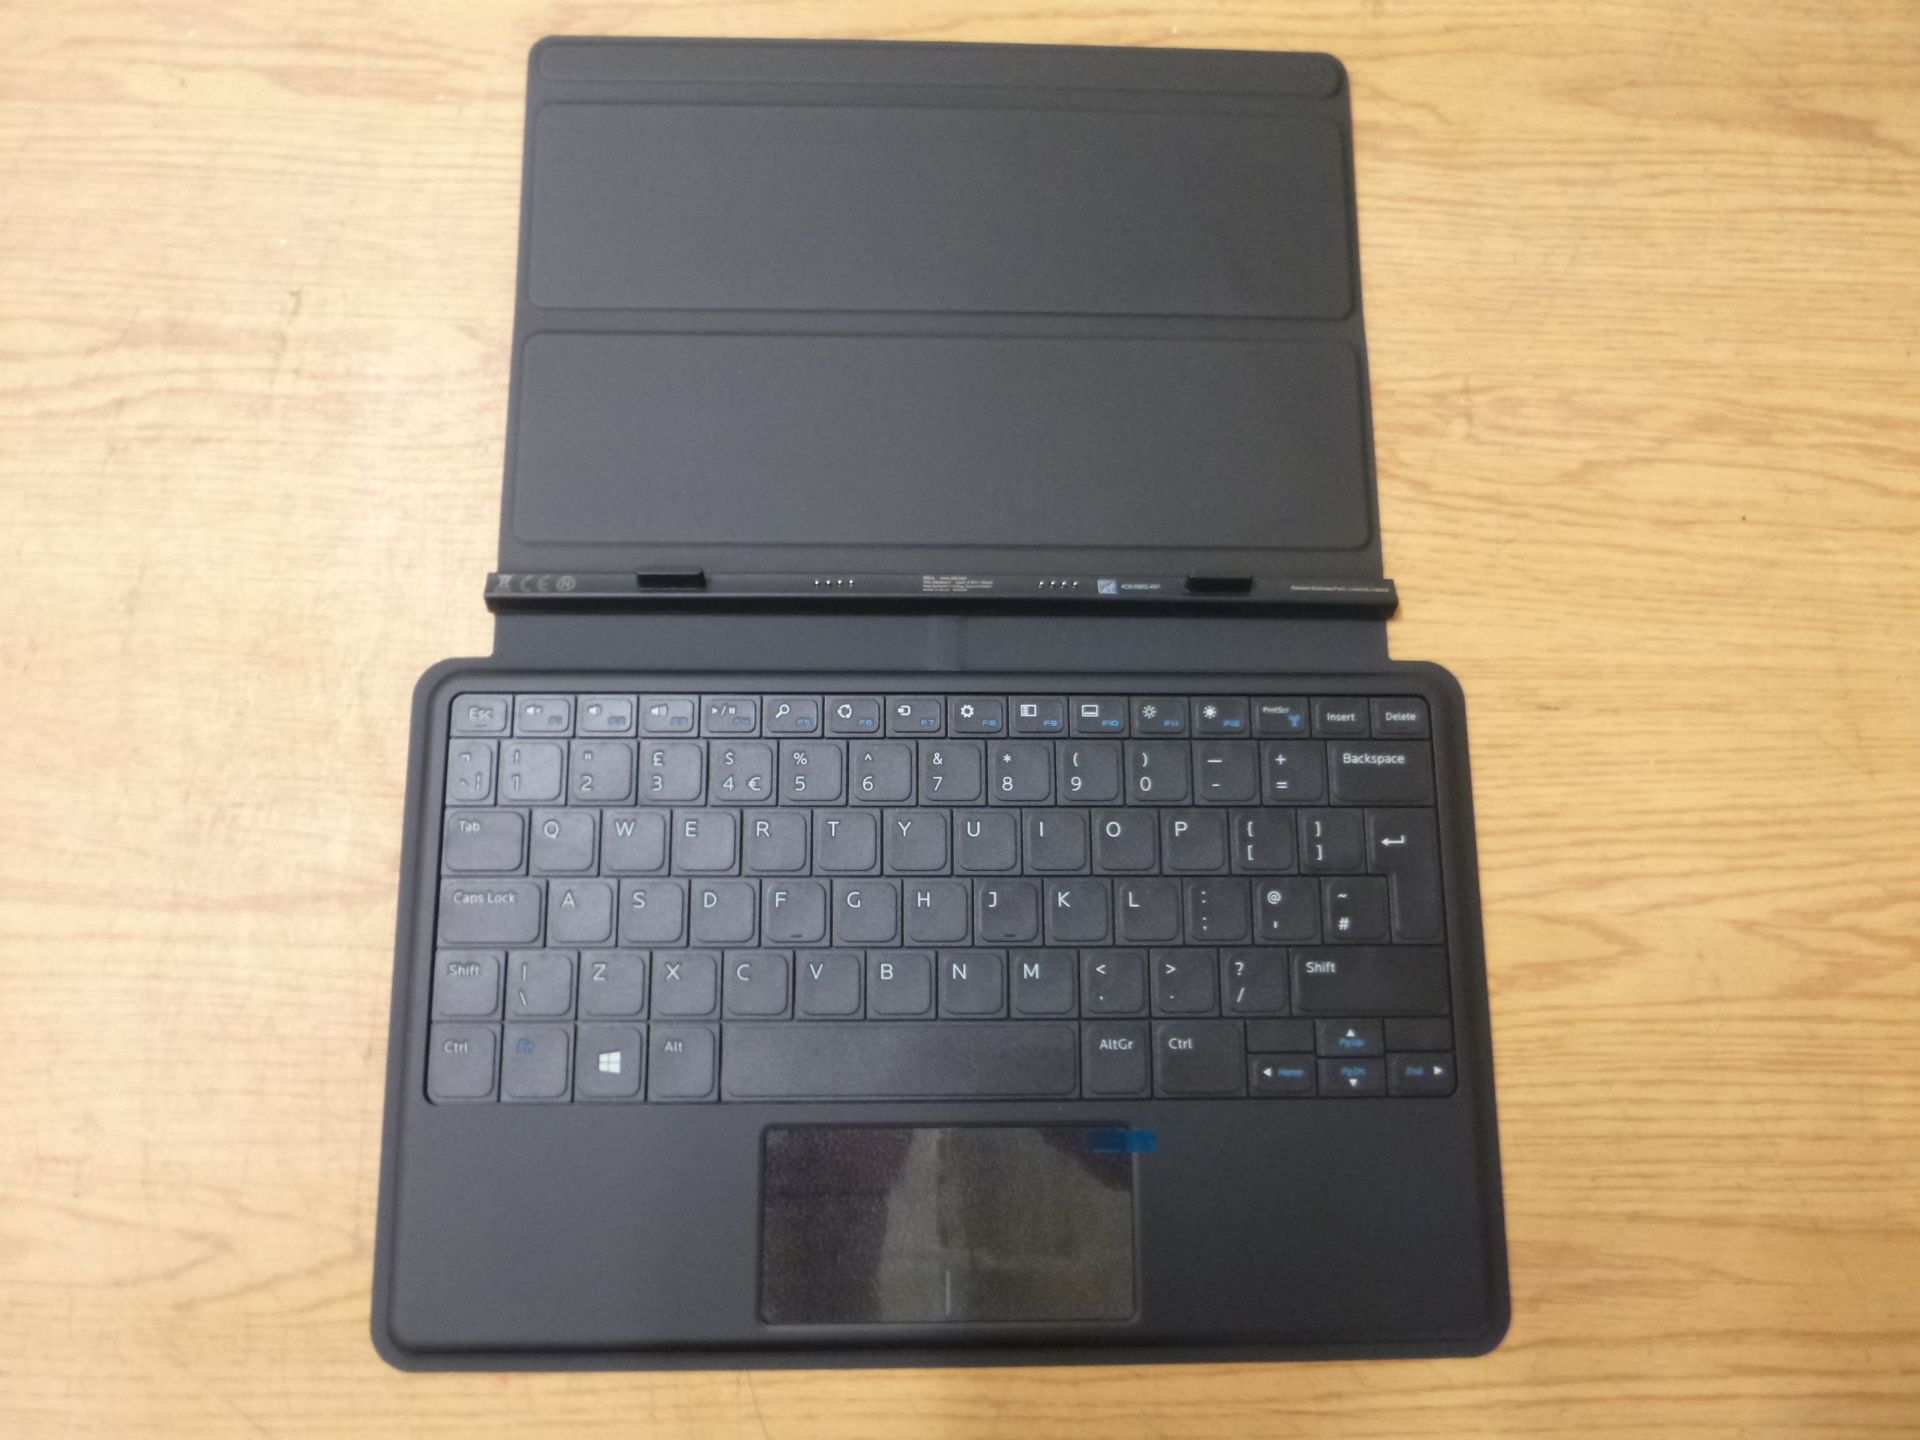 DELL SLIM TABLET KEYBOARD FOR DELL VENUE 11 PRO 5130 / 7130 / 7139 TABLET. BOXED. - Image 2 of 2